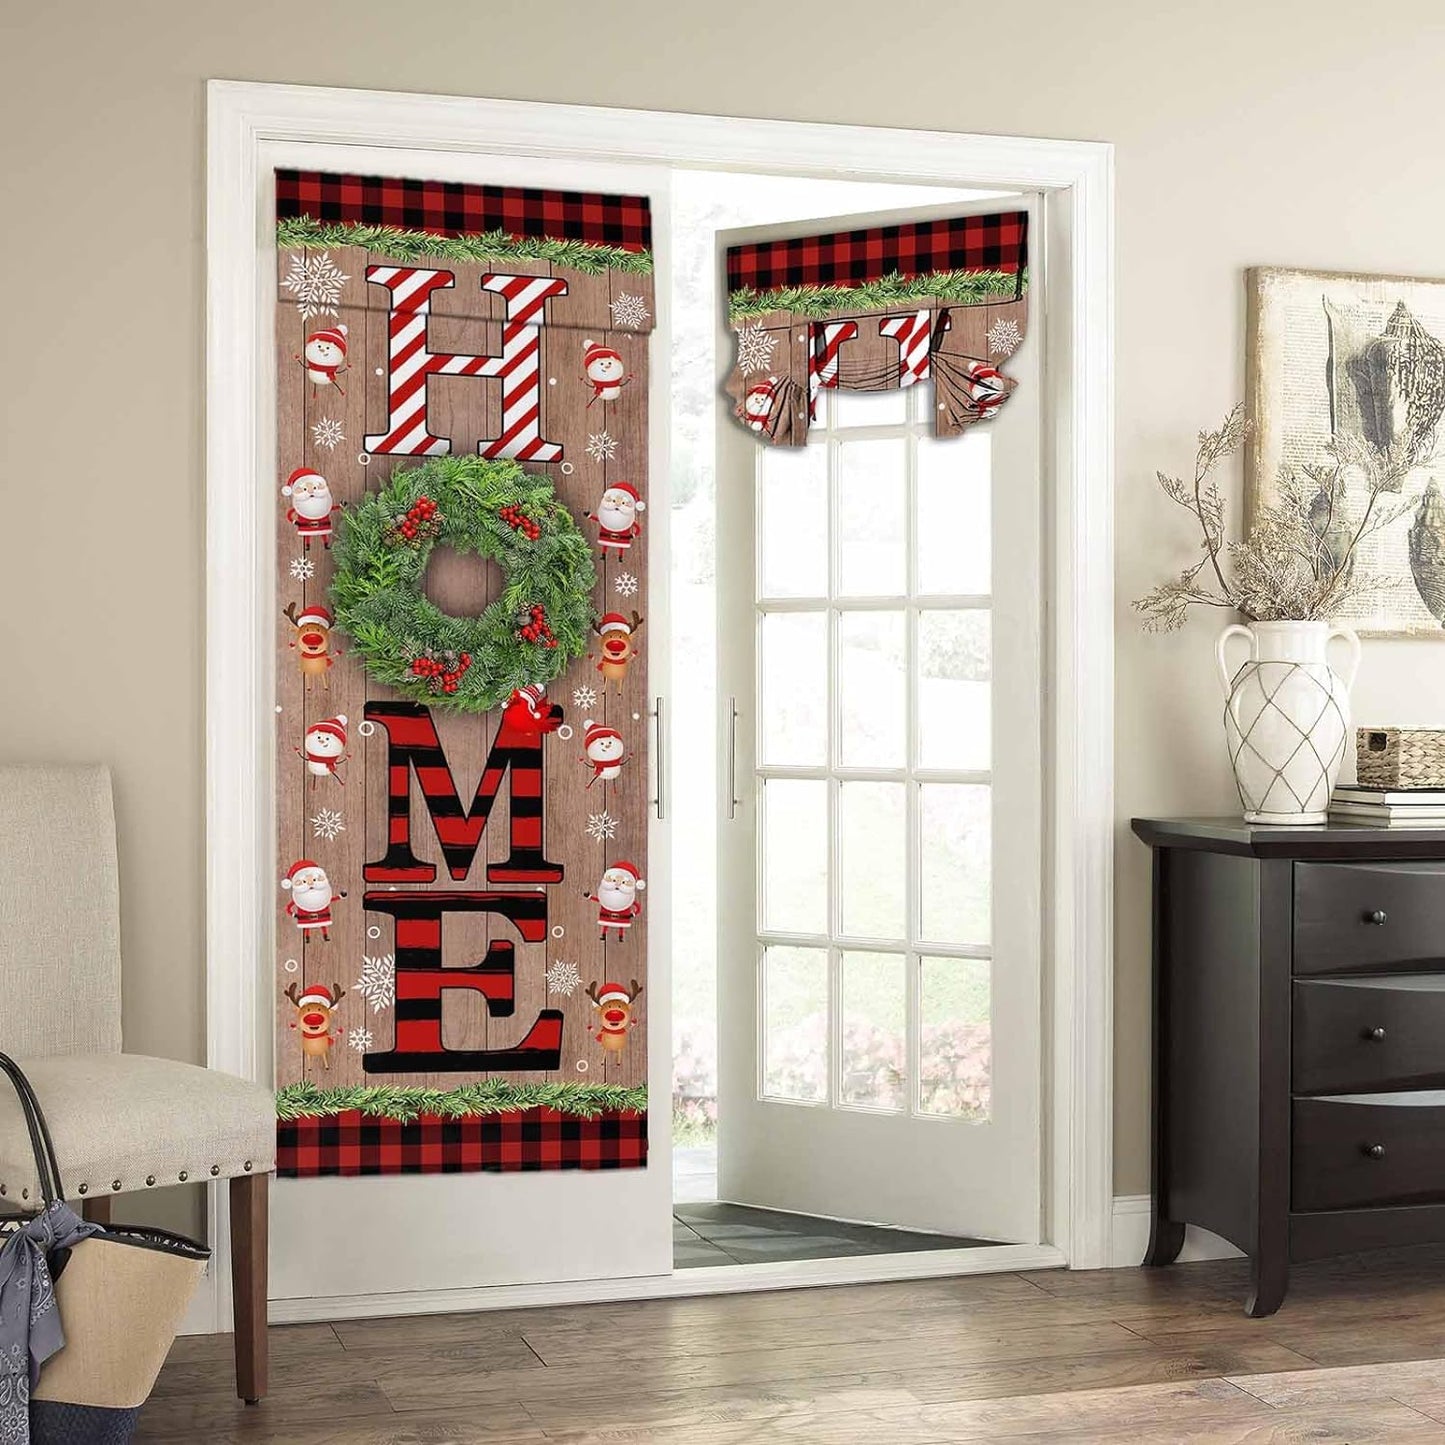 BEMIGO Door Curtains for Door Windows, Vintage Wooden Door Window Curtains for French Glass Door, Privacy Thermal Insulated Tie up Door Shades, Farmhouse Colorful Small Window Curtains 26 X 42 Inch  BEMIGO Red Brown 70.00" X 26.00" 